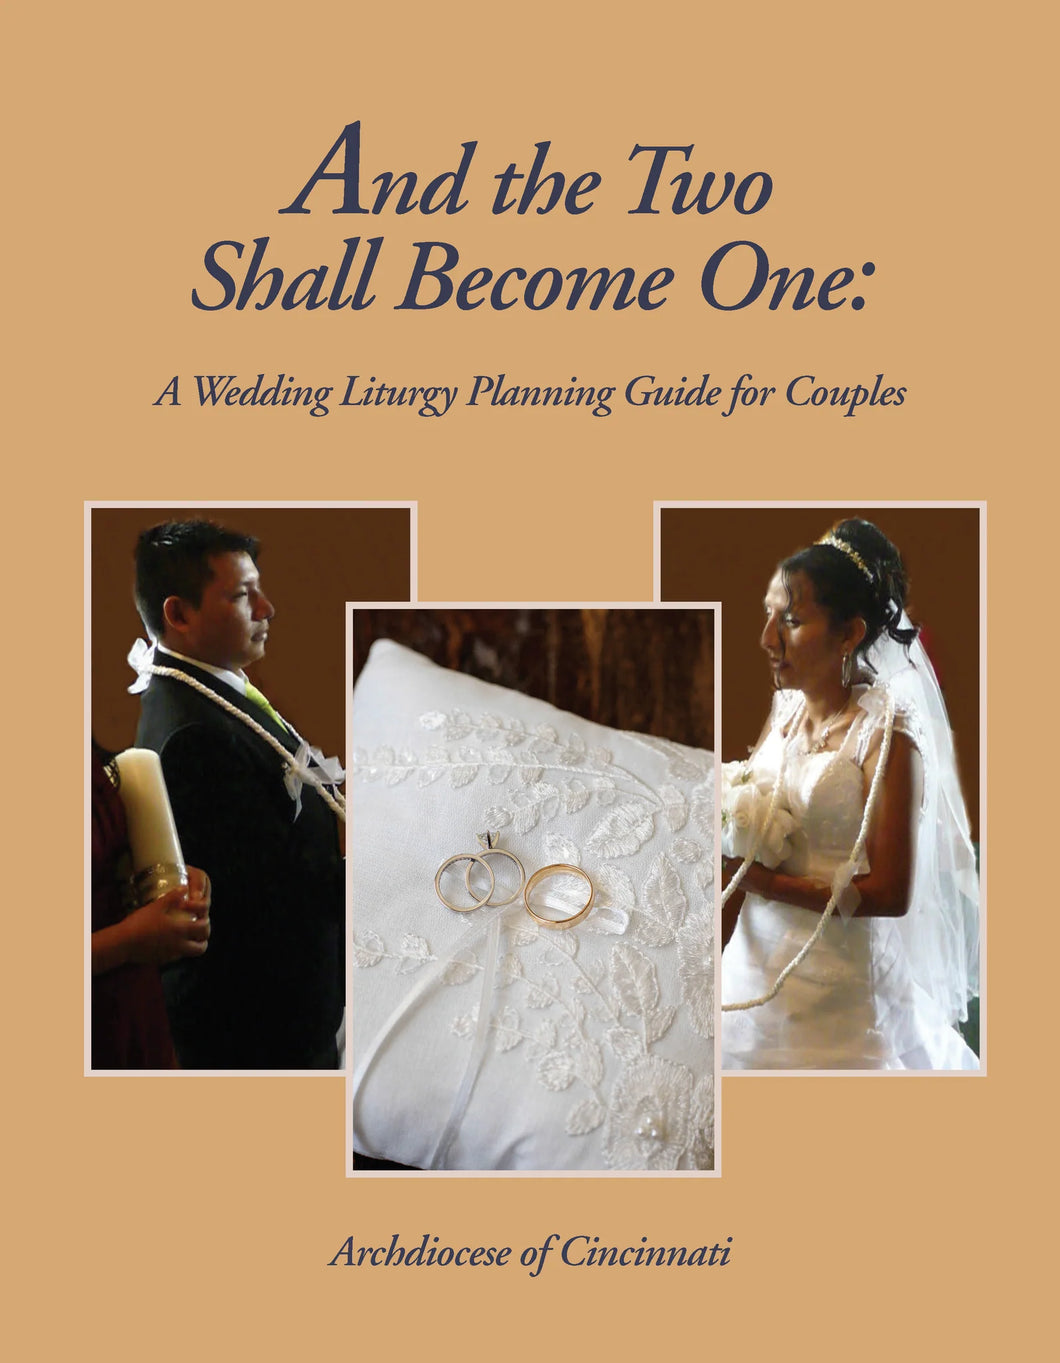 A Wedding Liturgy Planning Guide for Couples